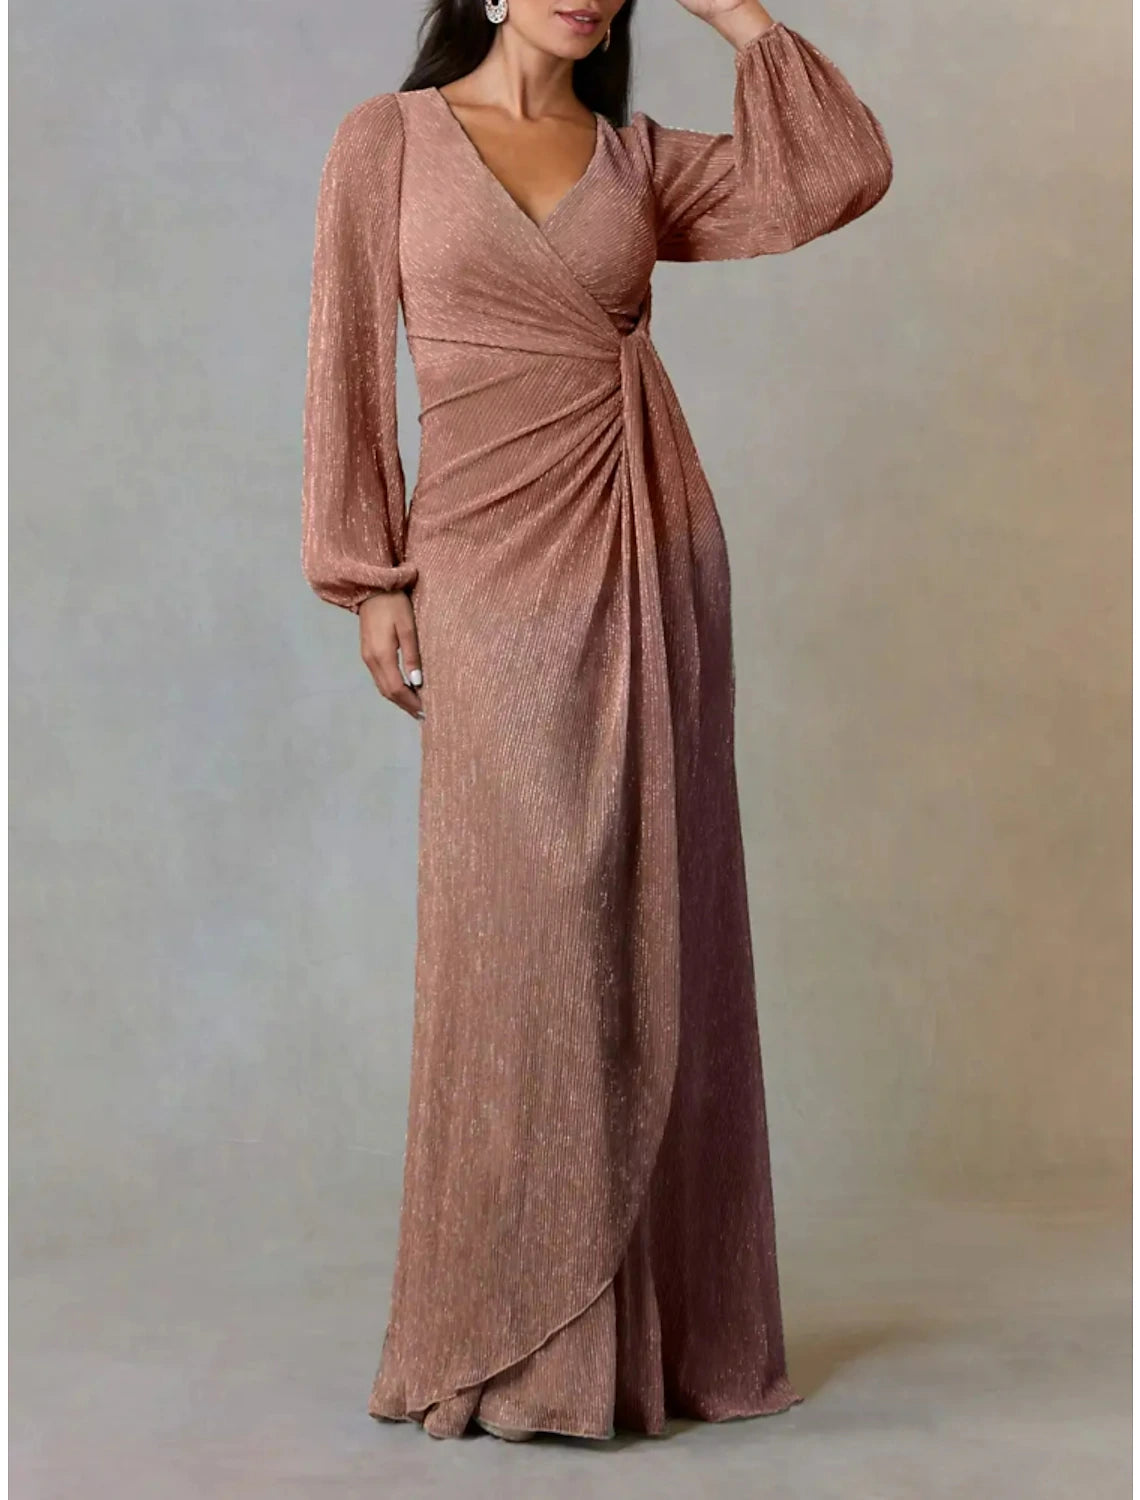 A-Line Mother of the Bride Dress Wedding Guest Simple Elegant V Neck Floor Length Chiffon Long Sleeve with Ruching Solid Color